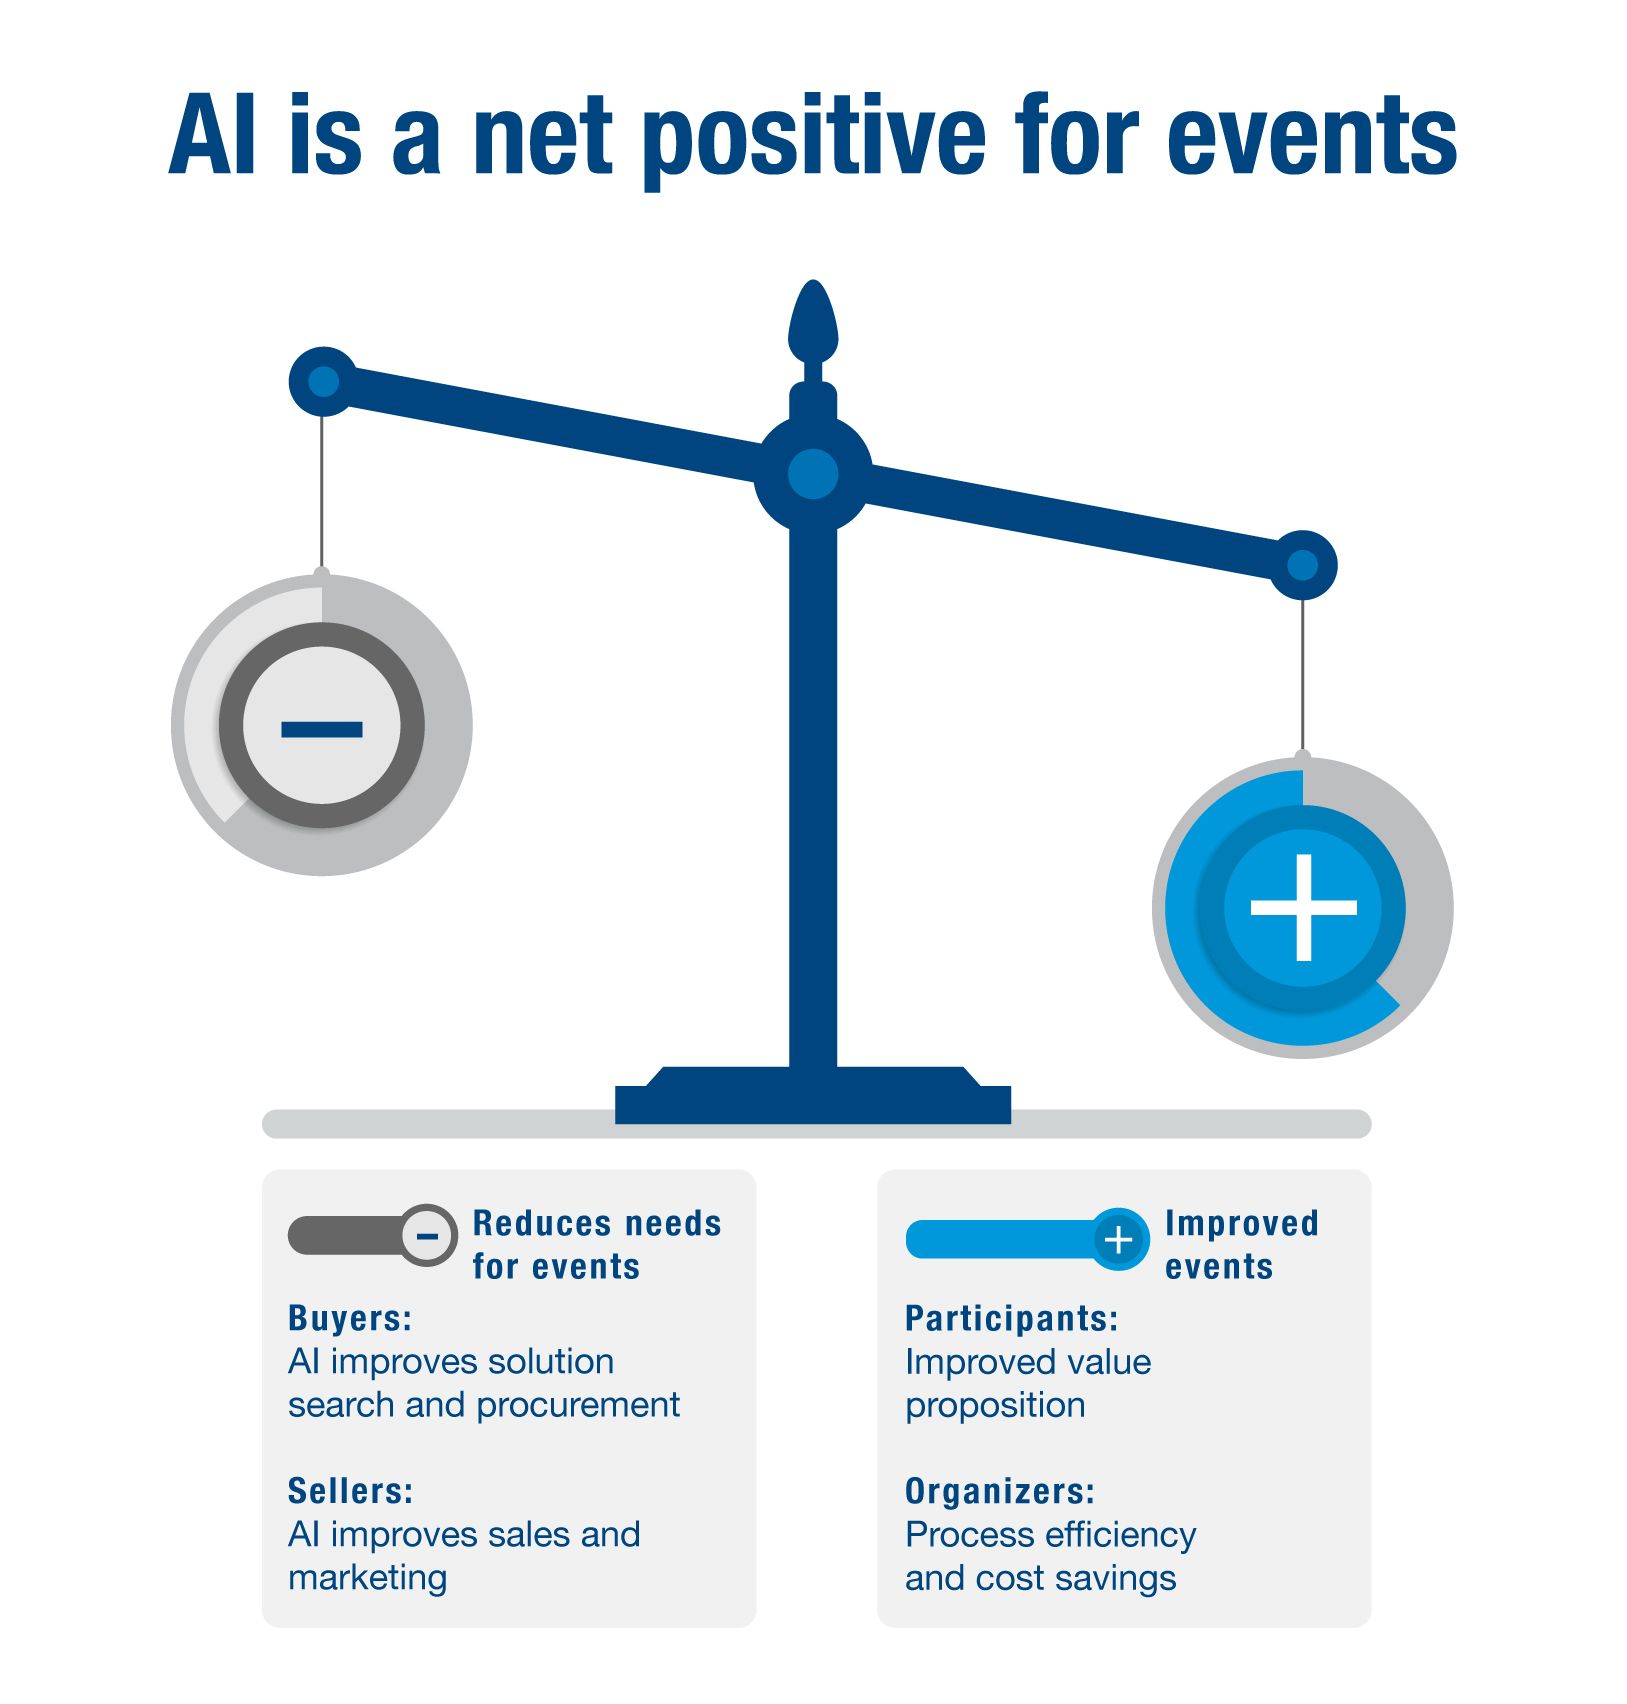 AI is a net positive for events. It reduces needs for events for buyers and sellers. Additionally, AI improves events for participants and organizers. 